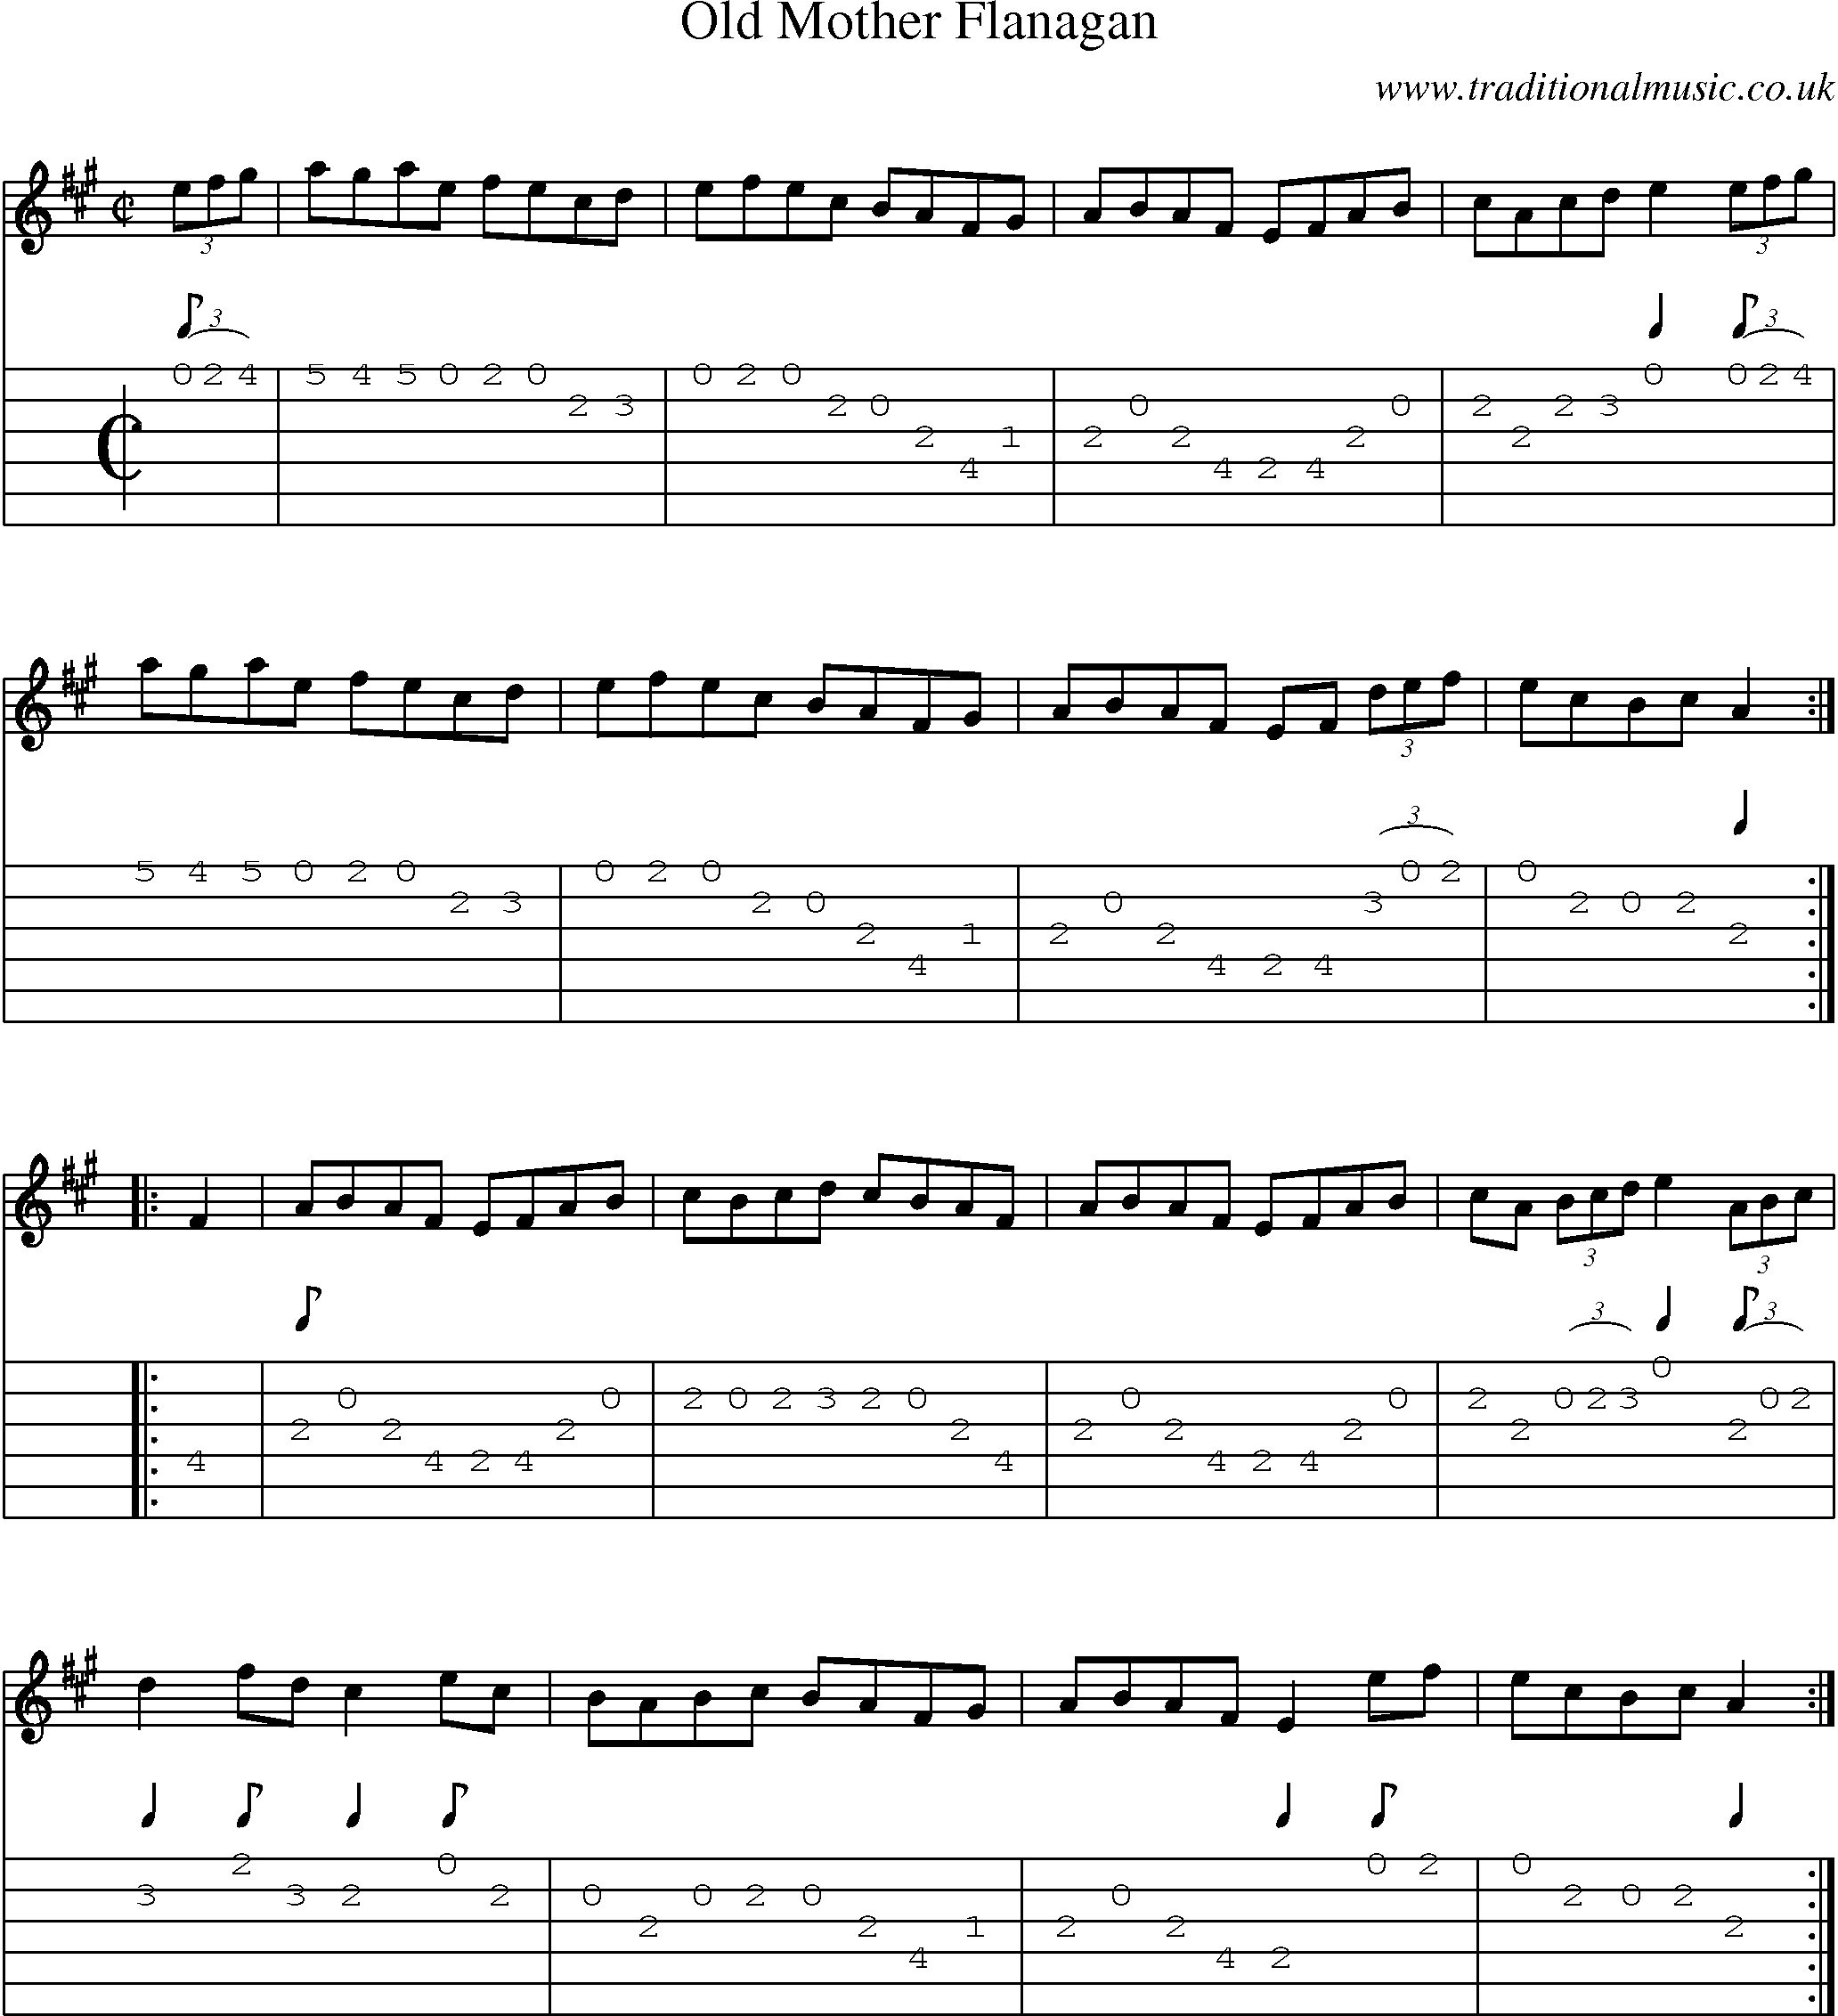 Music Score and Guitar Tabs for Old Mother Flanagan